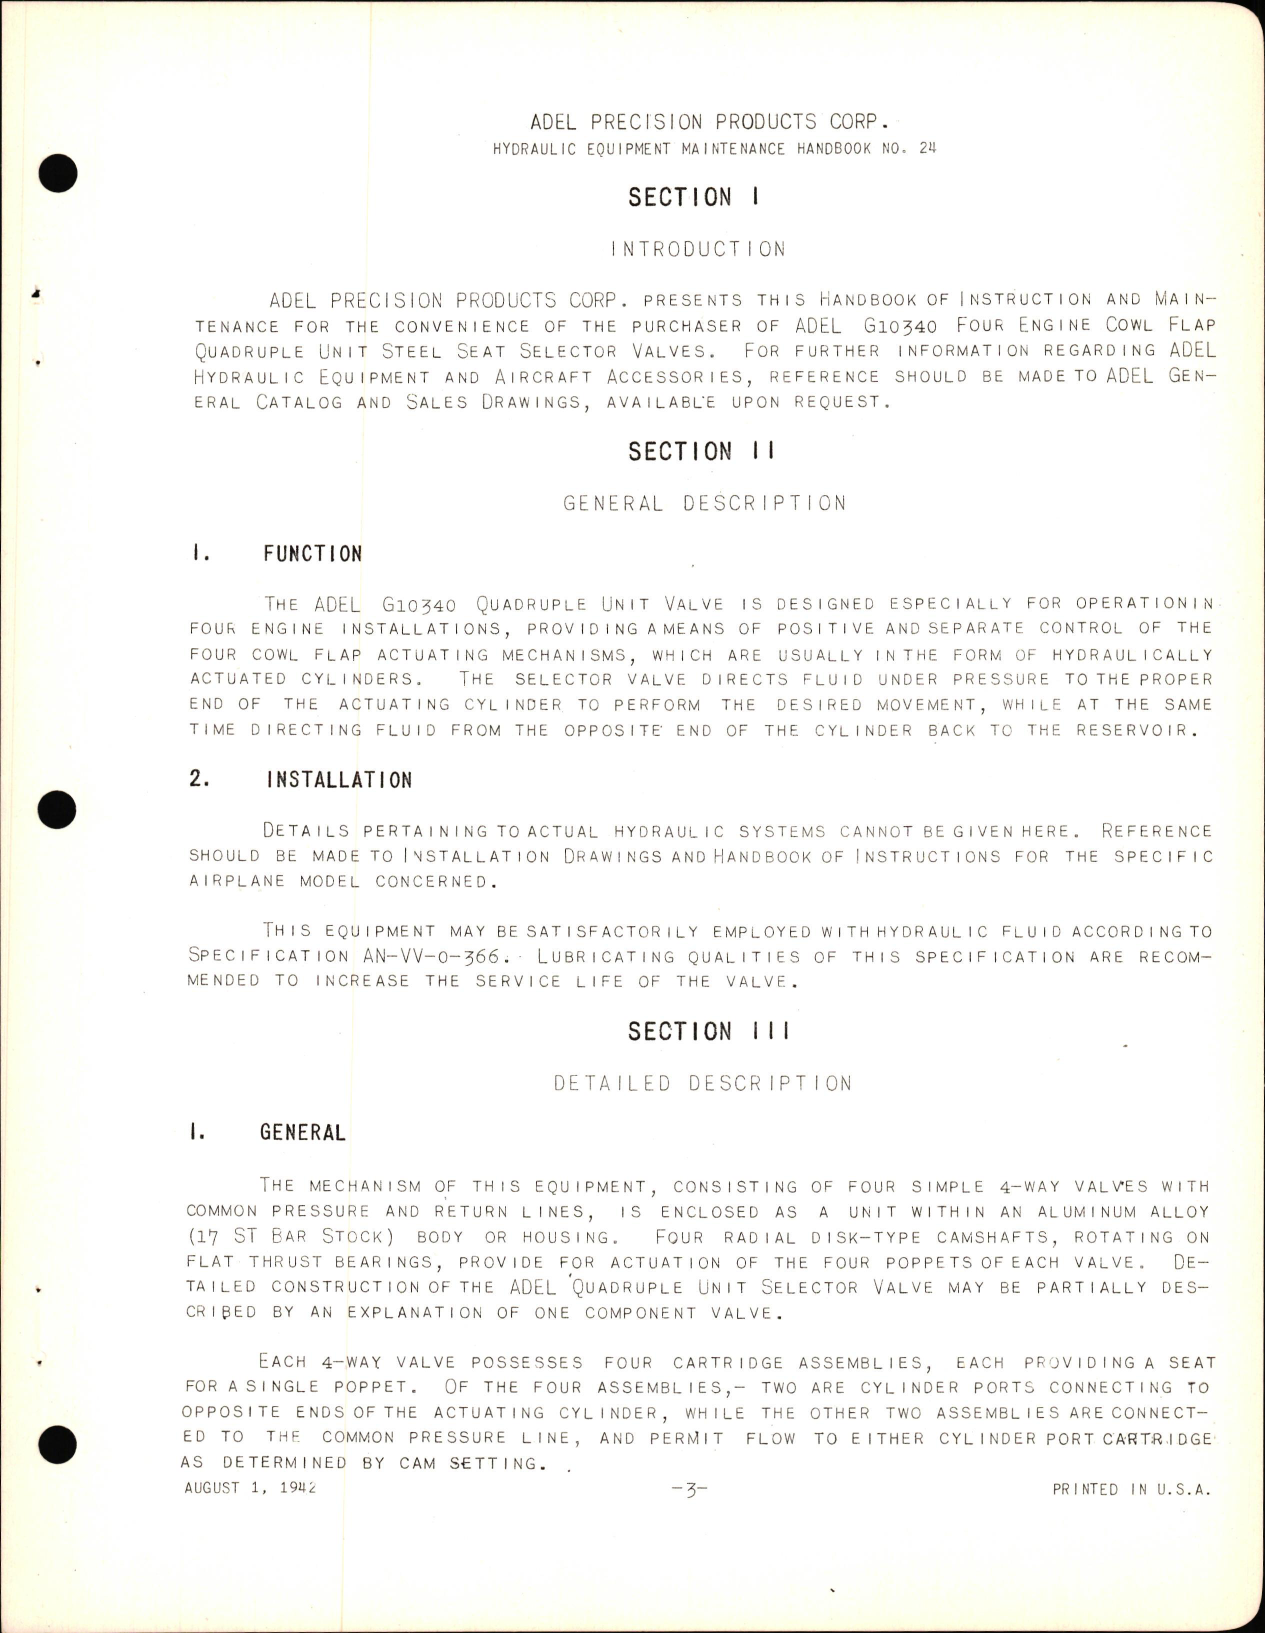 Sample page 7 from AirCorps Library document: Instructions with Parts Catalog for Quadruple Cowl Flap Selector Valve G10340 